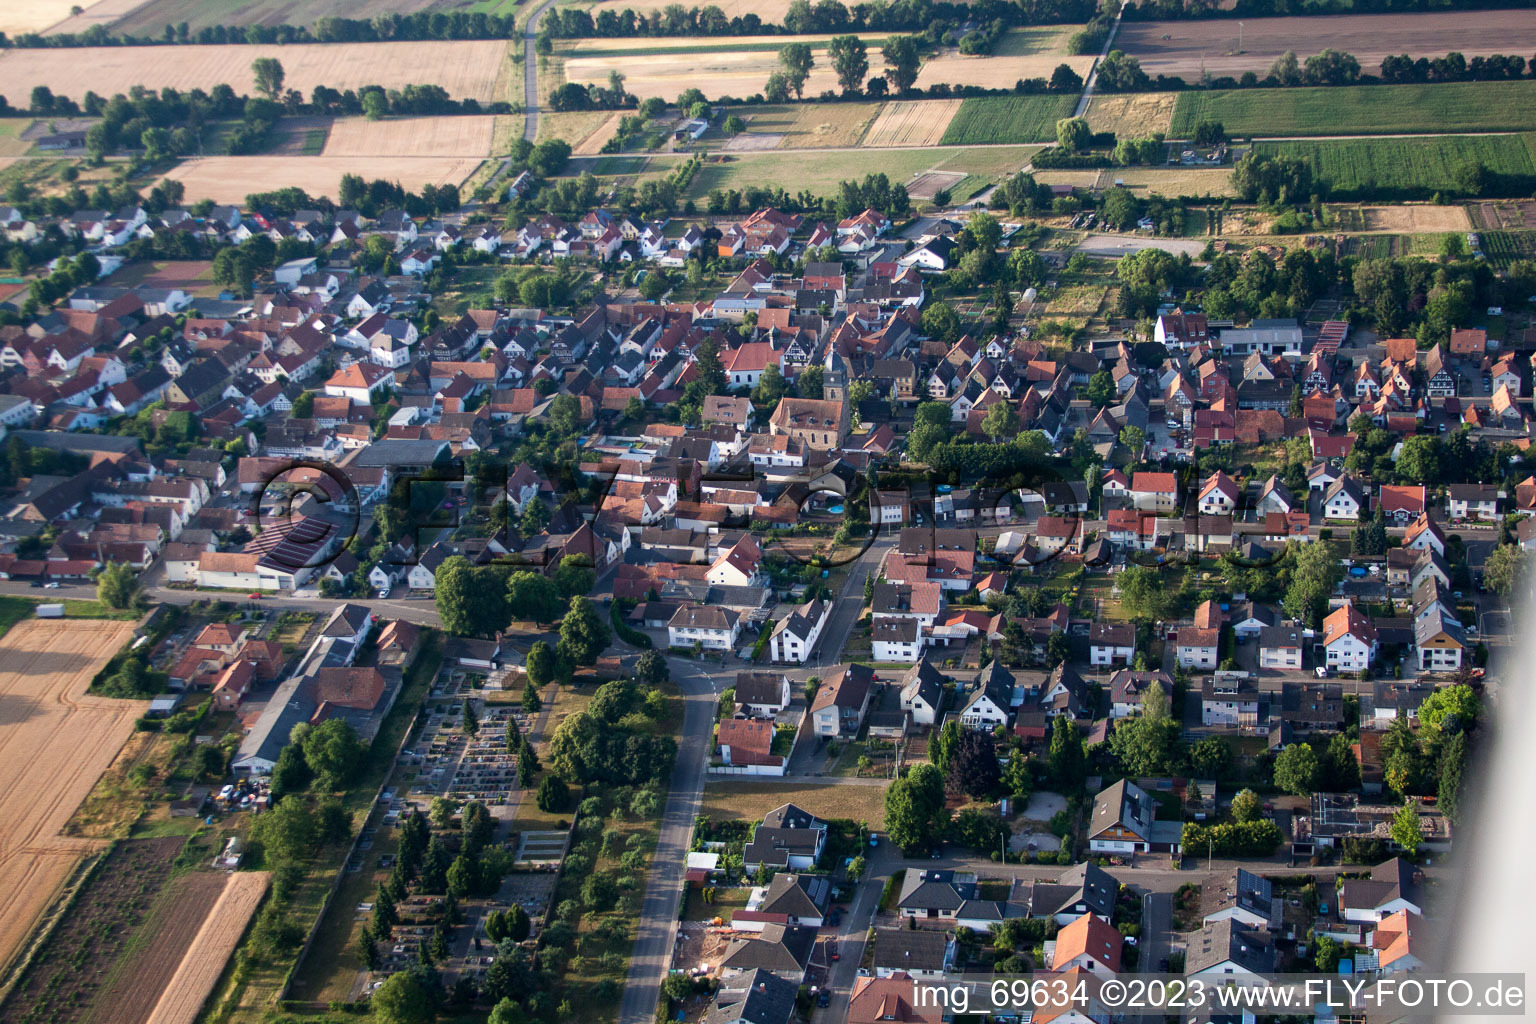 Lustadt in the state Rhineland-Palatinate, Germany from the drone perspective